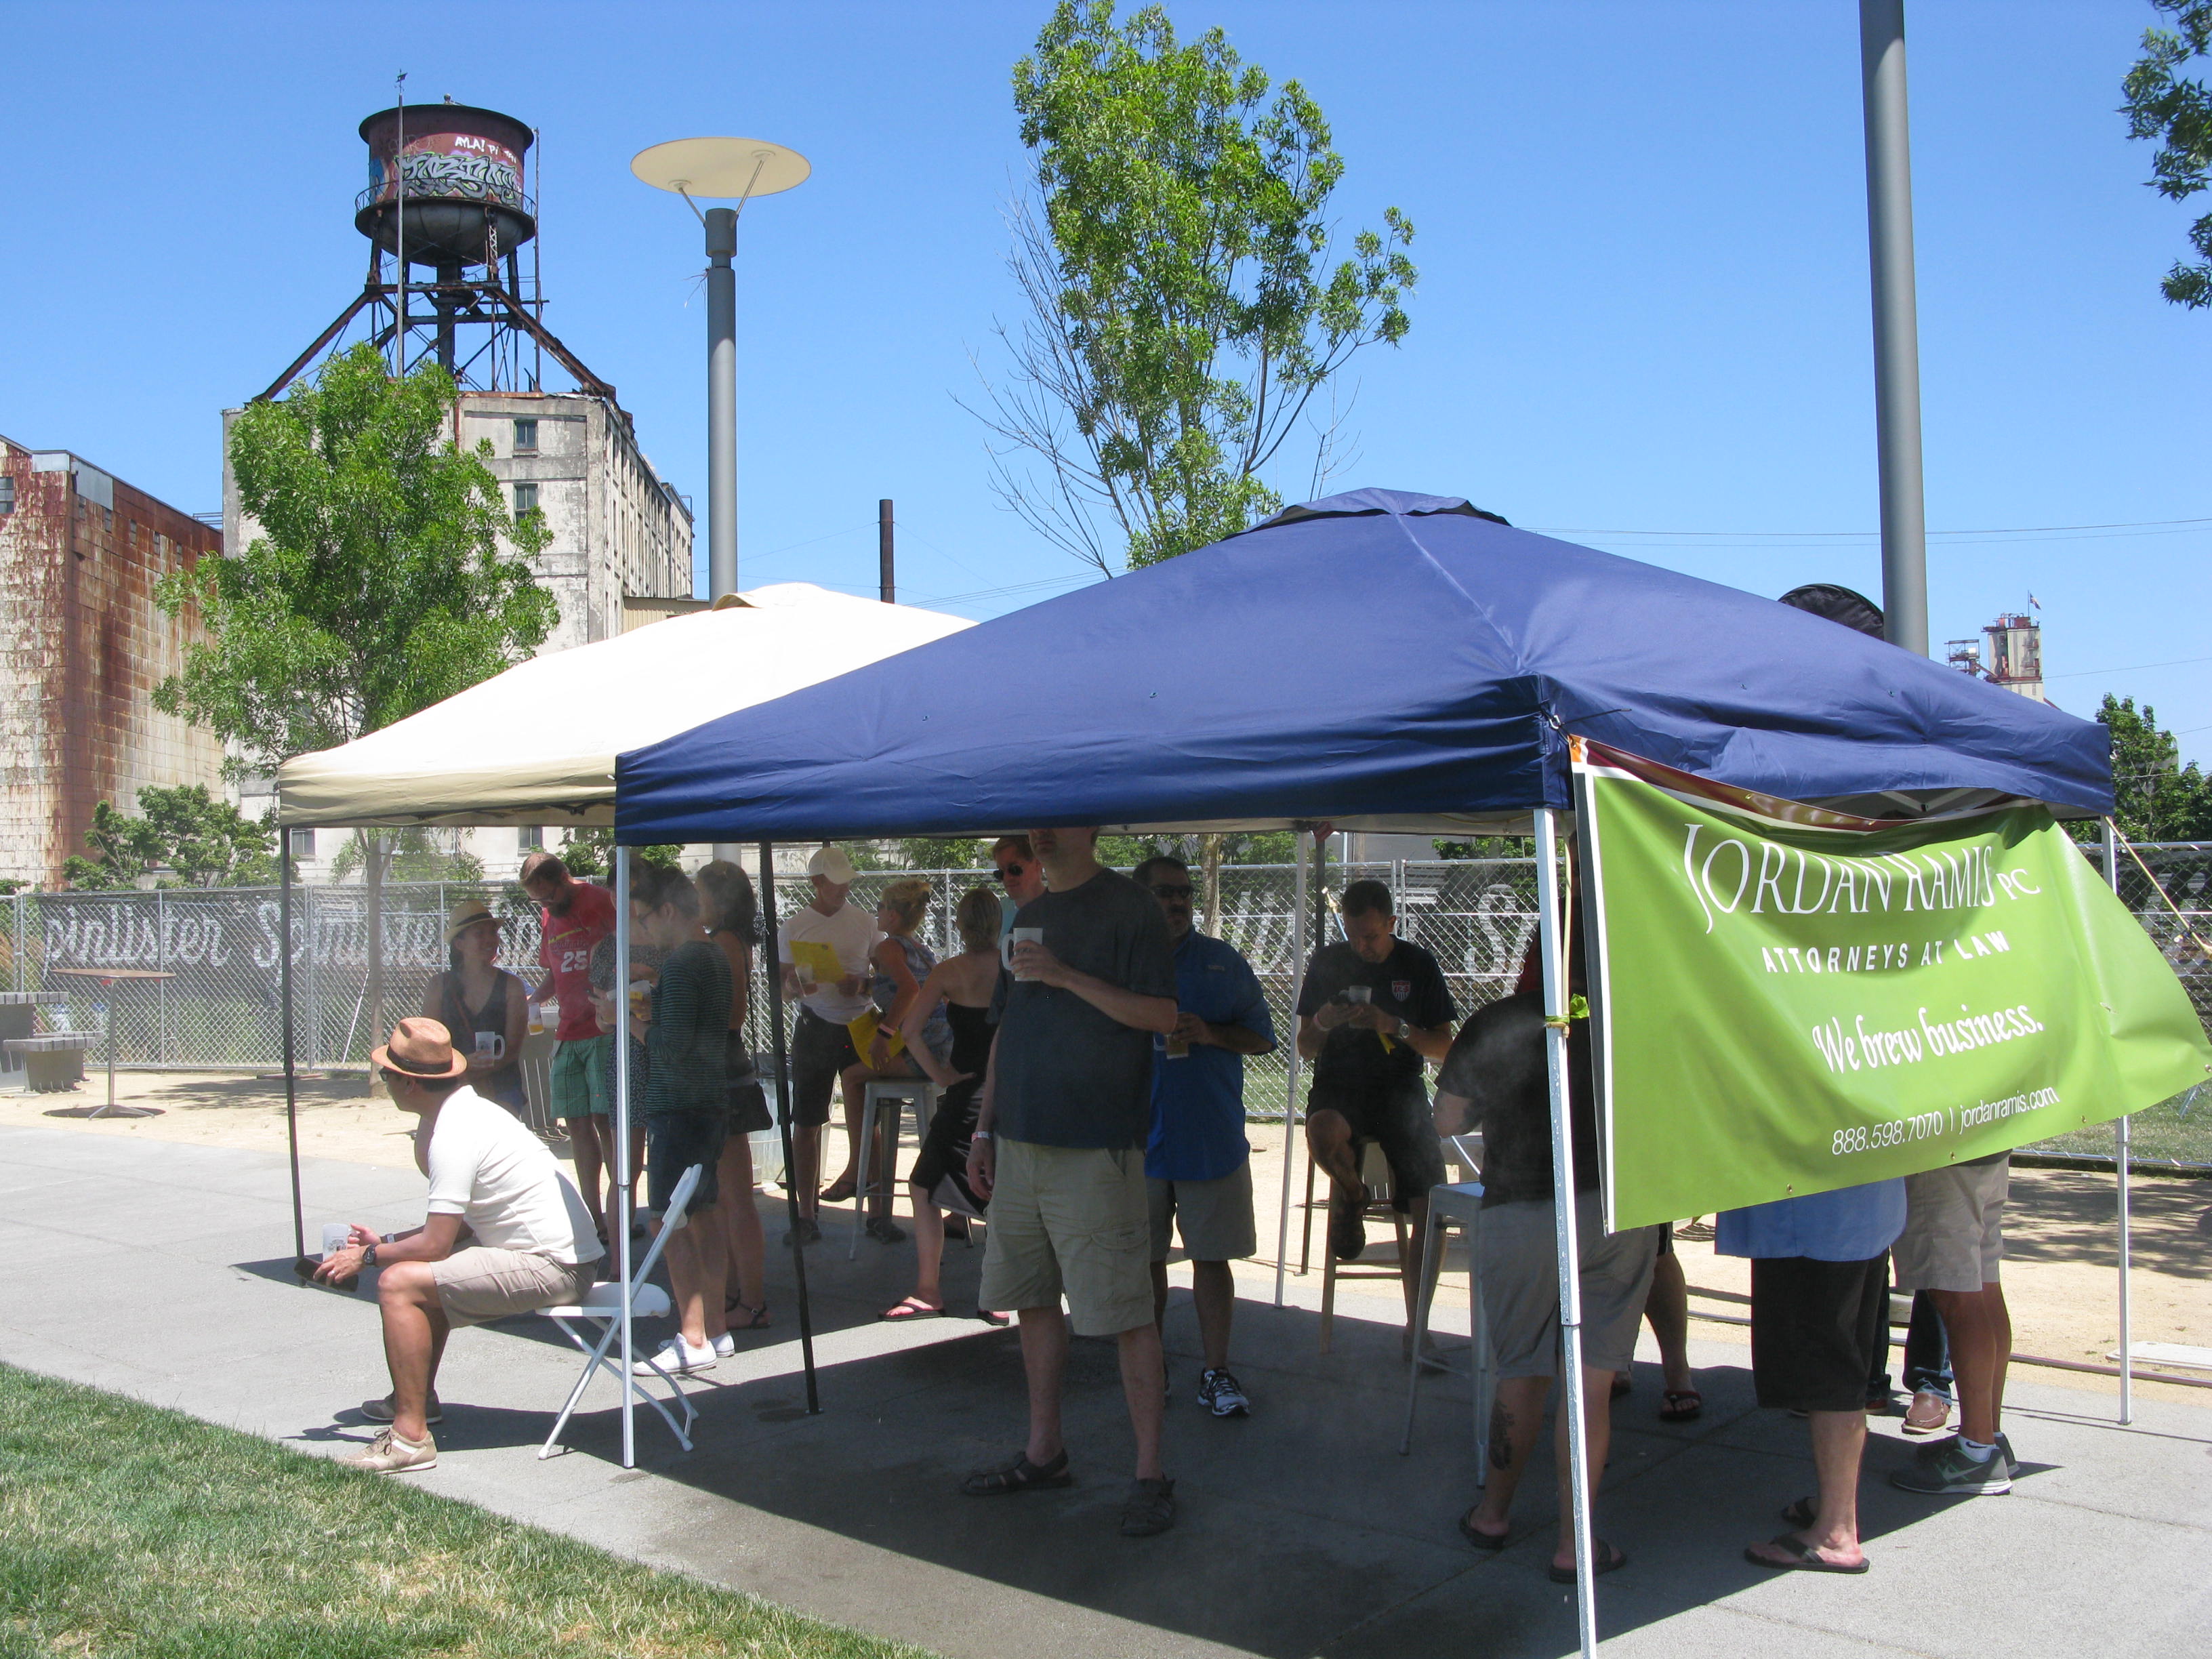 Cooling tents at the inaugural Portland Craft Beer Fest in 2015. (FoystonFoto)